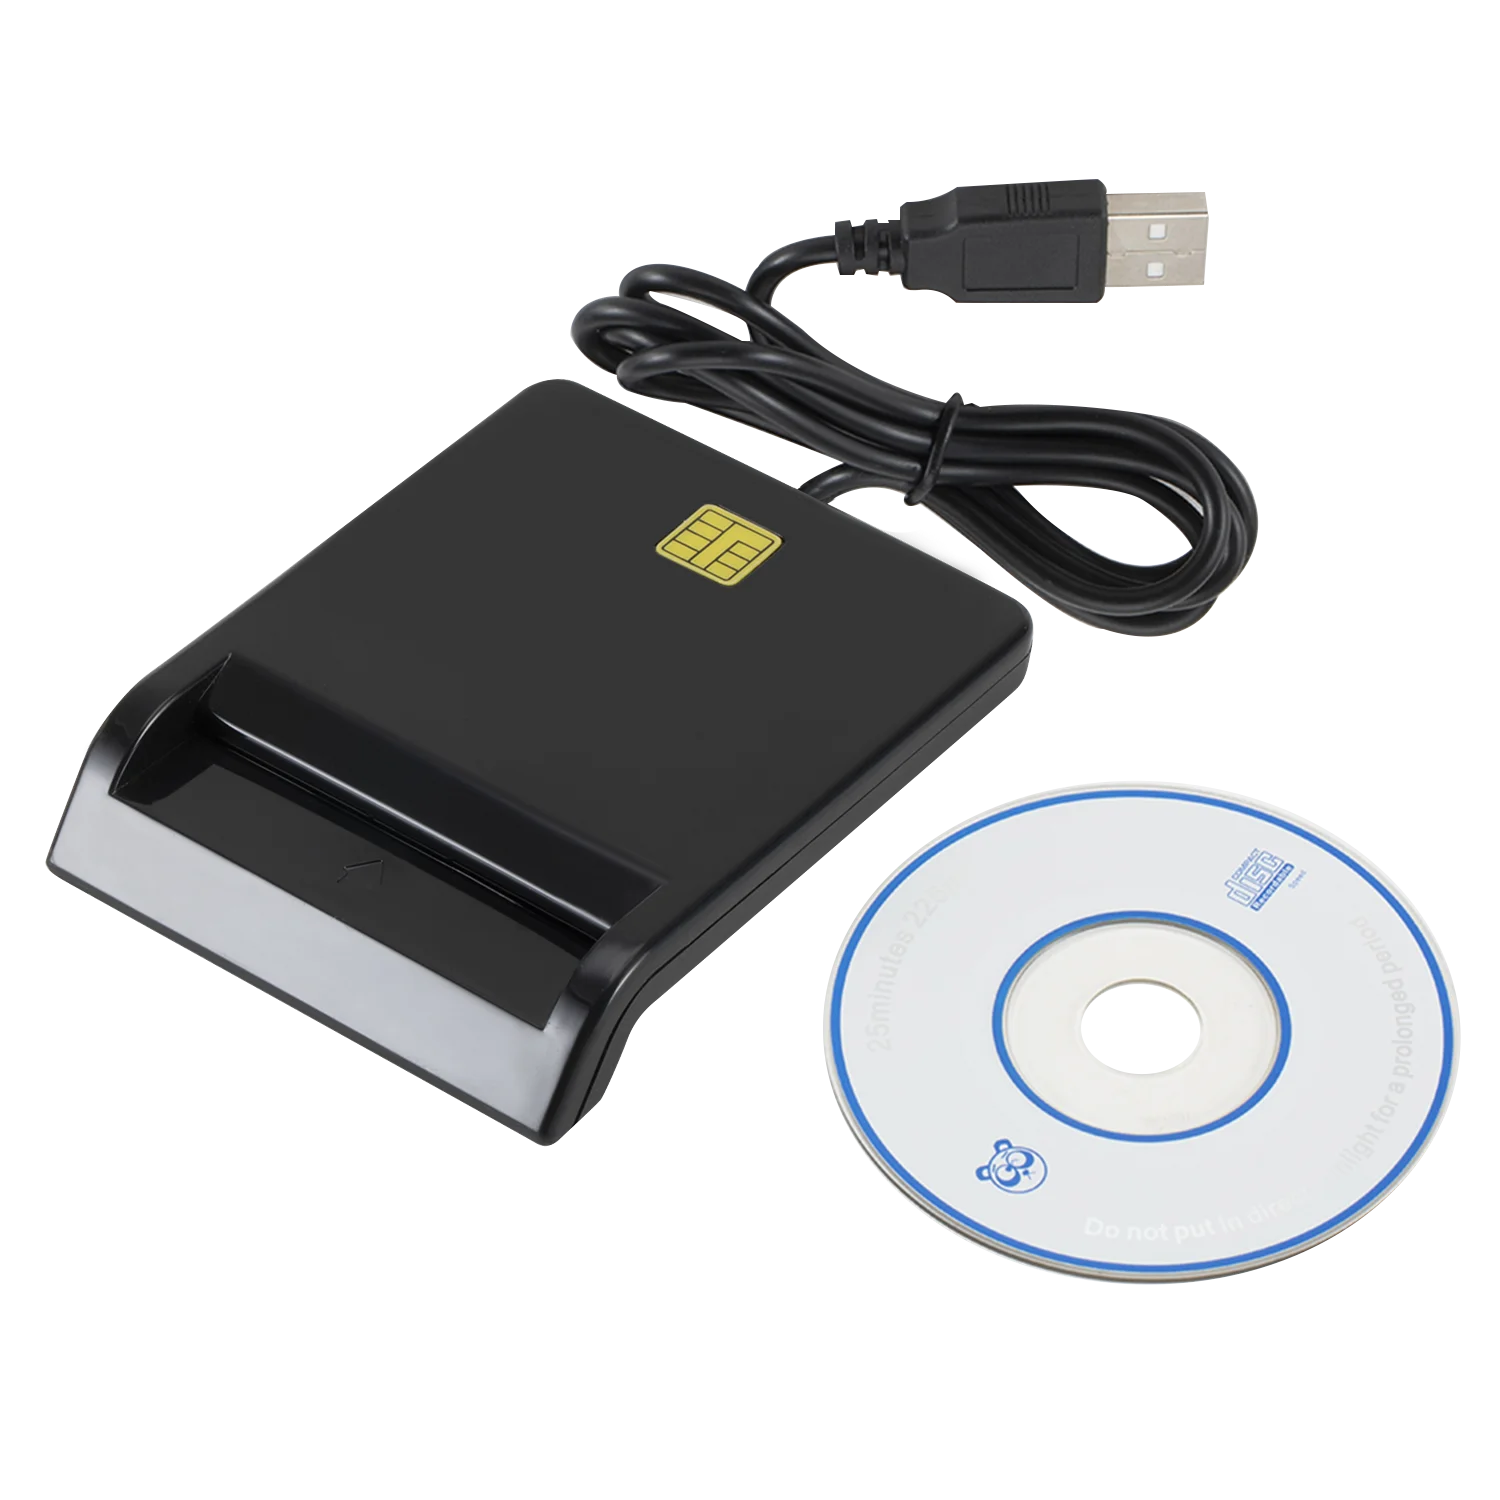 Spiritus skud halvt Pzzpss X01 Usb Smart Card Reader For Bank Card Ic/id Emv Card Reader High  Quality For Windows 7 8 10 Linux Os Usb-ccid Iso 7816 - Usb Gadgets -  AliExpress